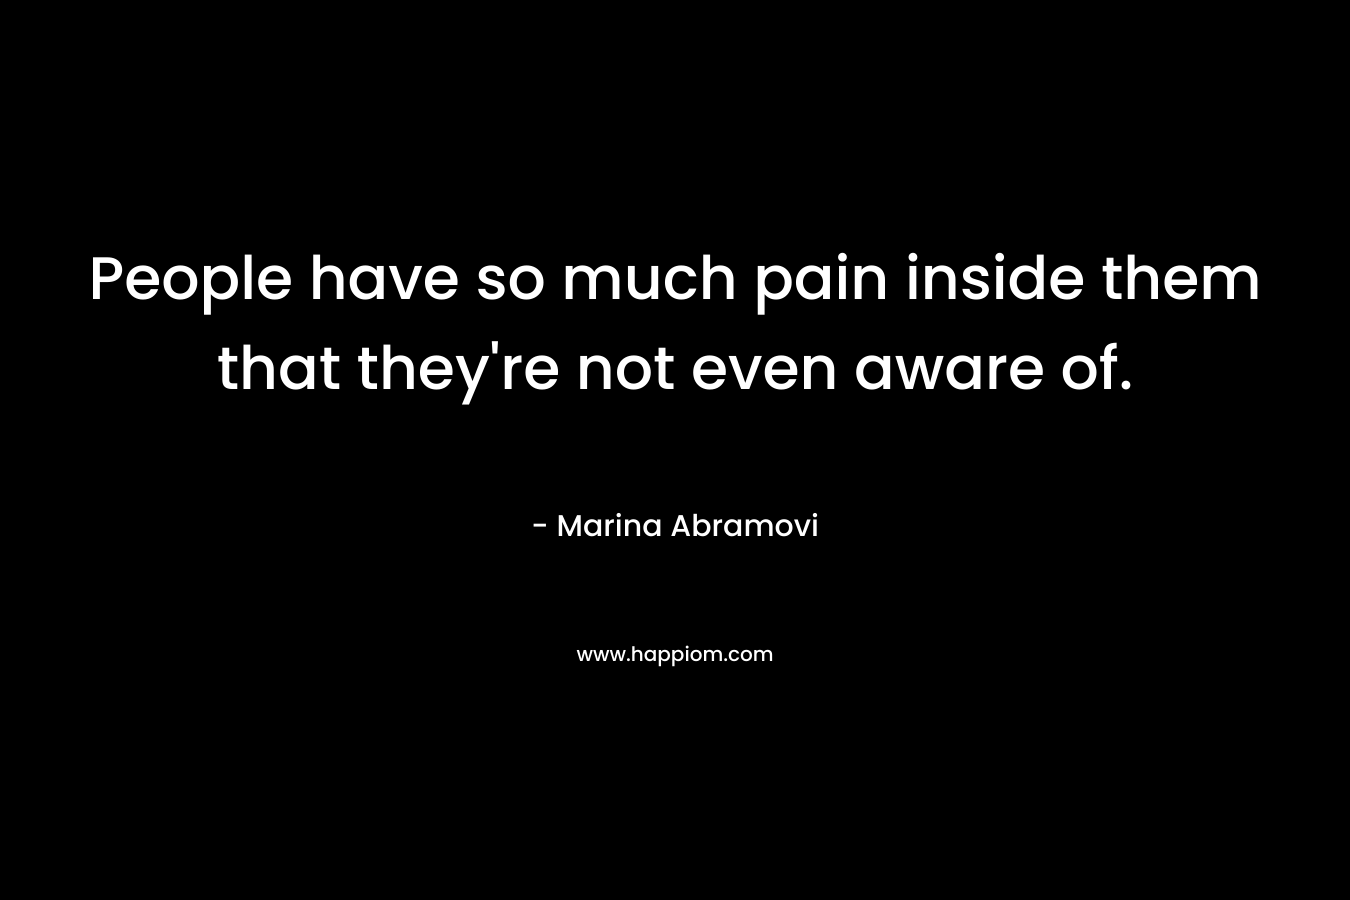 People have so much pain inside them that they're not even aware of.